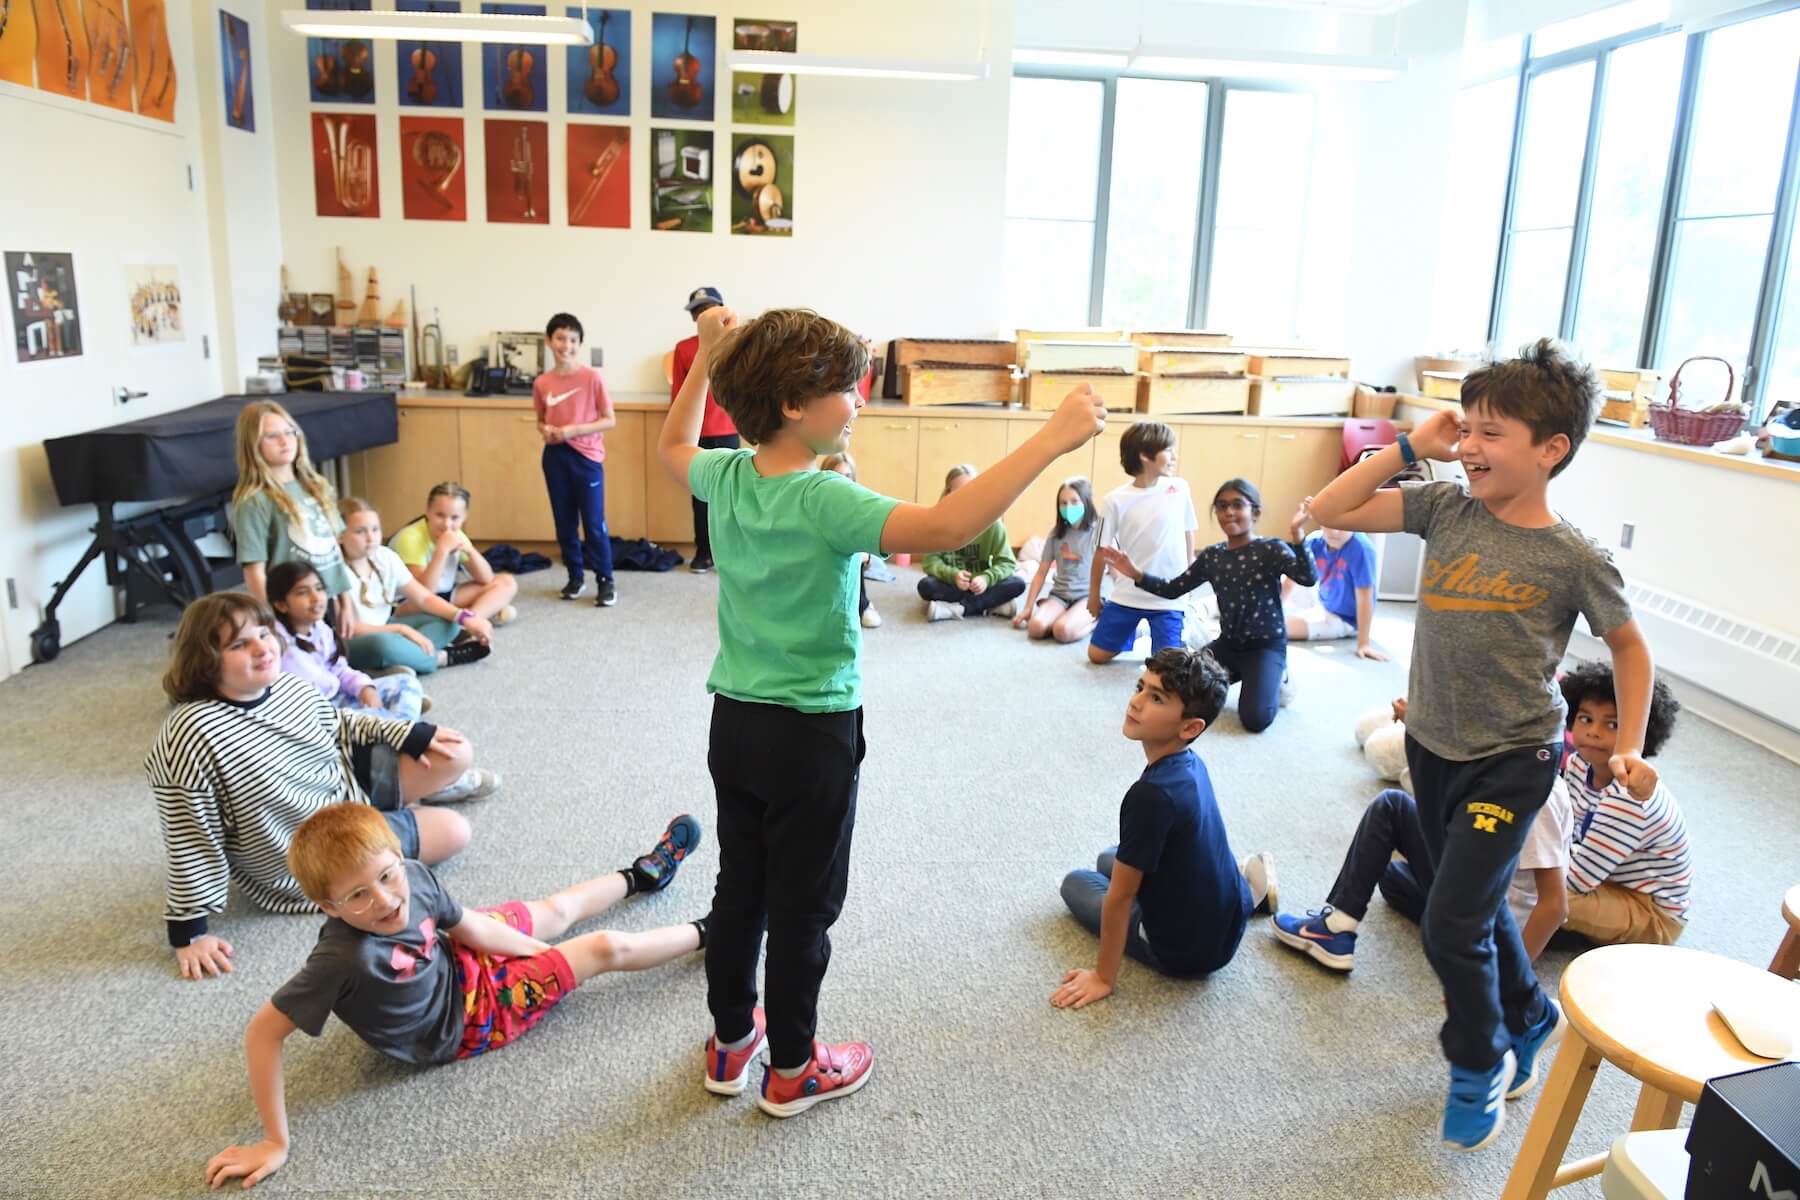 Ethical Culture Fieldston School Fieldston Lower students sitting in circle during music class